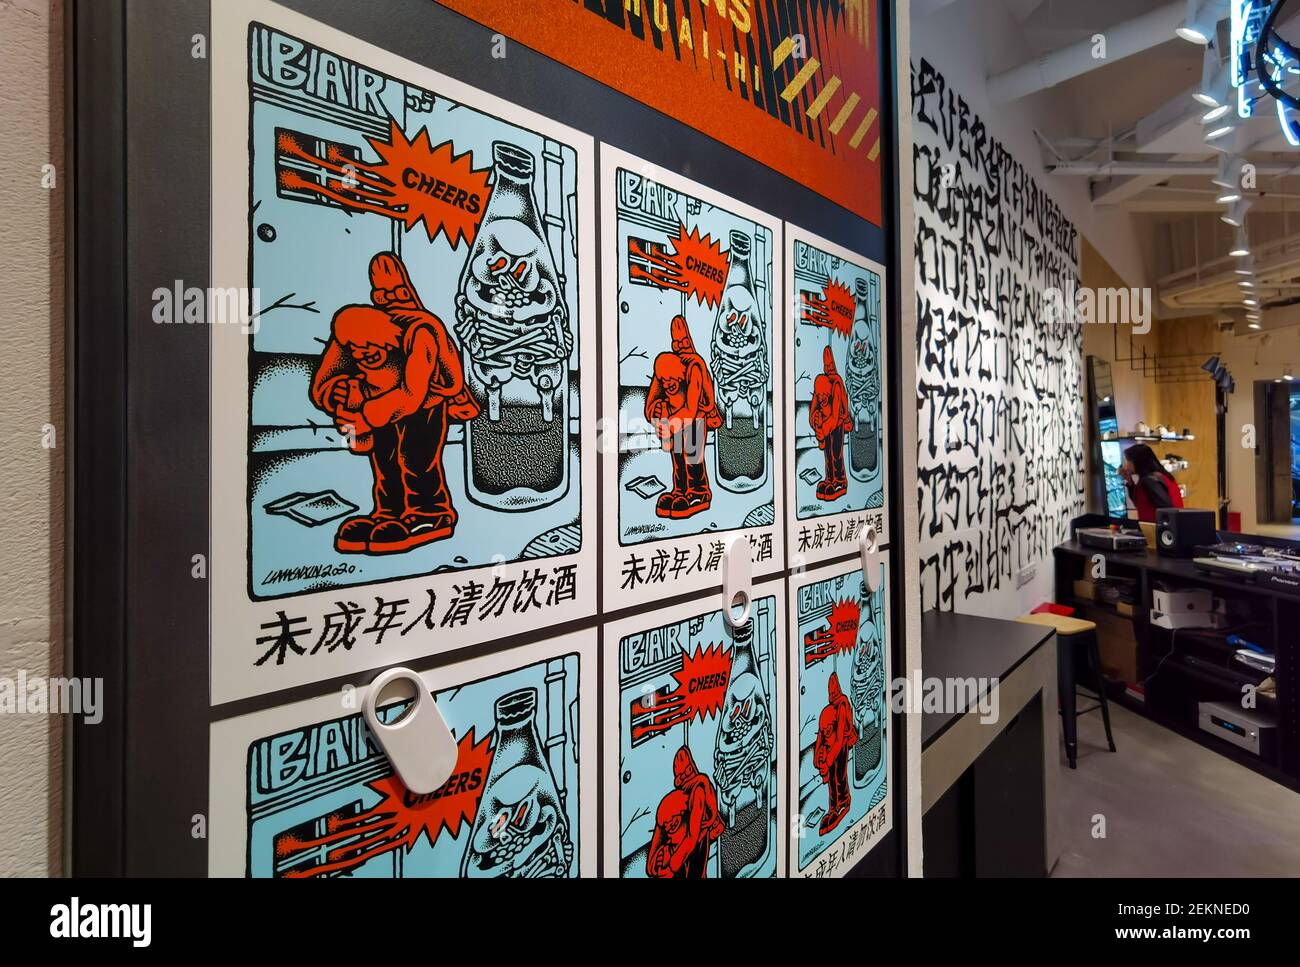 Consumers and Vans fans shop in Vans Huai-Hi, in Shanghai, China, 27  September 2020. This is Vans' first Asia Boutique, after London and New  York. A Vans boutique is a top-level store